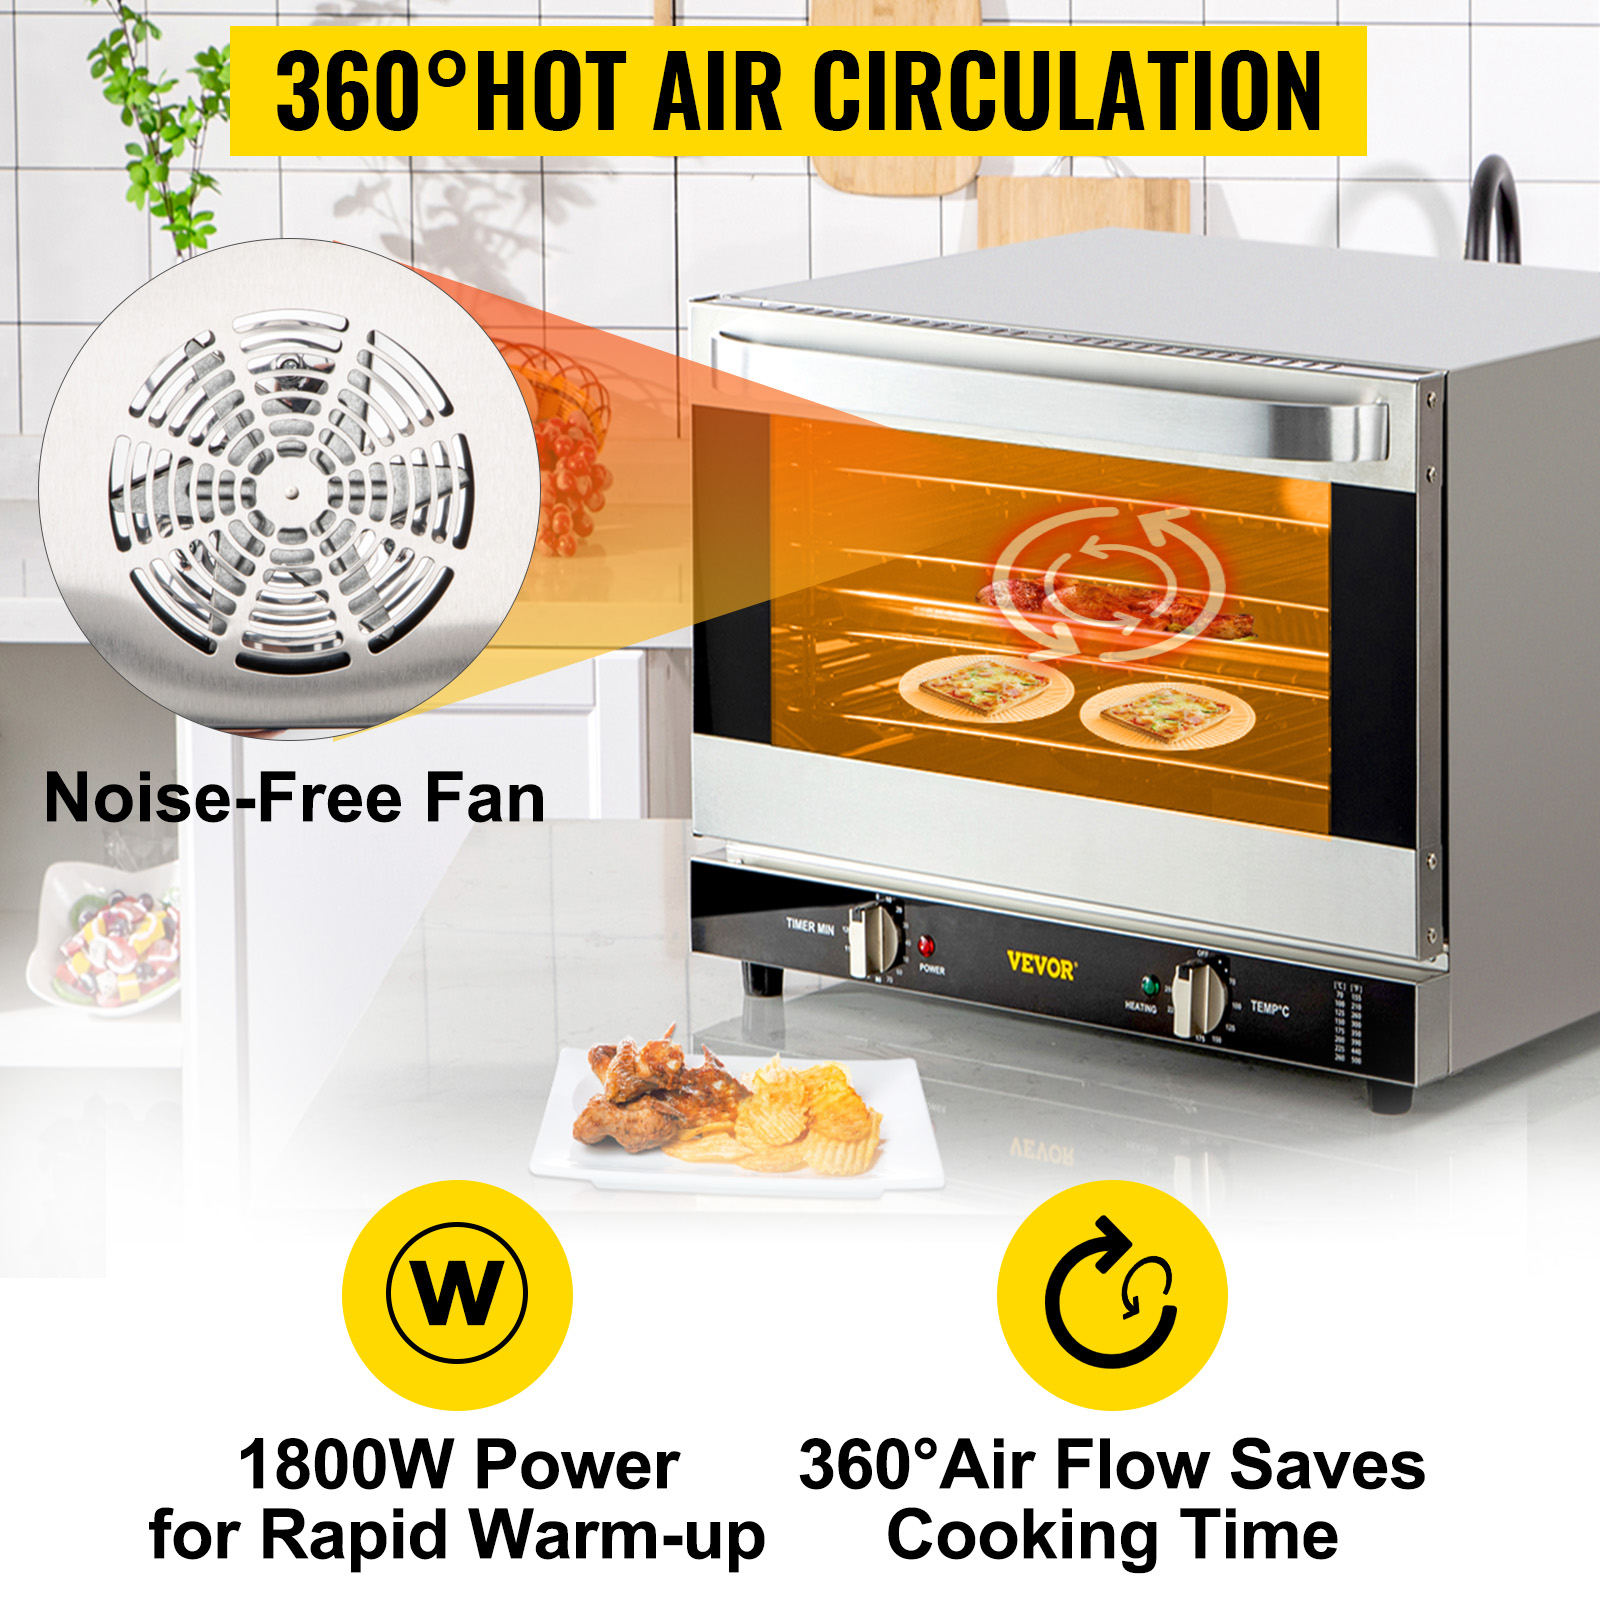 https://d2qc09rl1gfuof.cloudfront.net/product/RFXHLM68L110V42FZ/commercial-convection-oven-m100-3.jpg